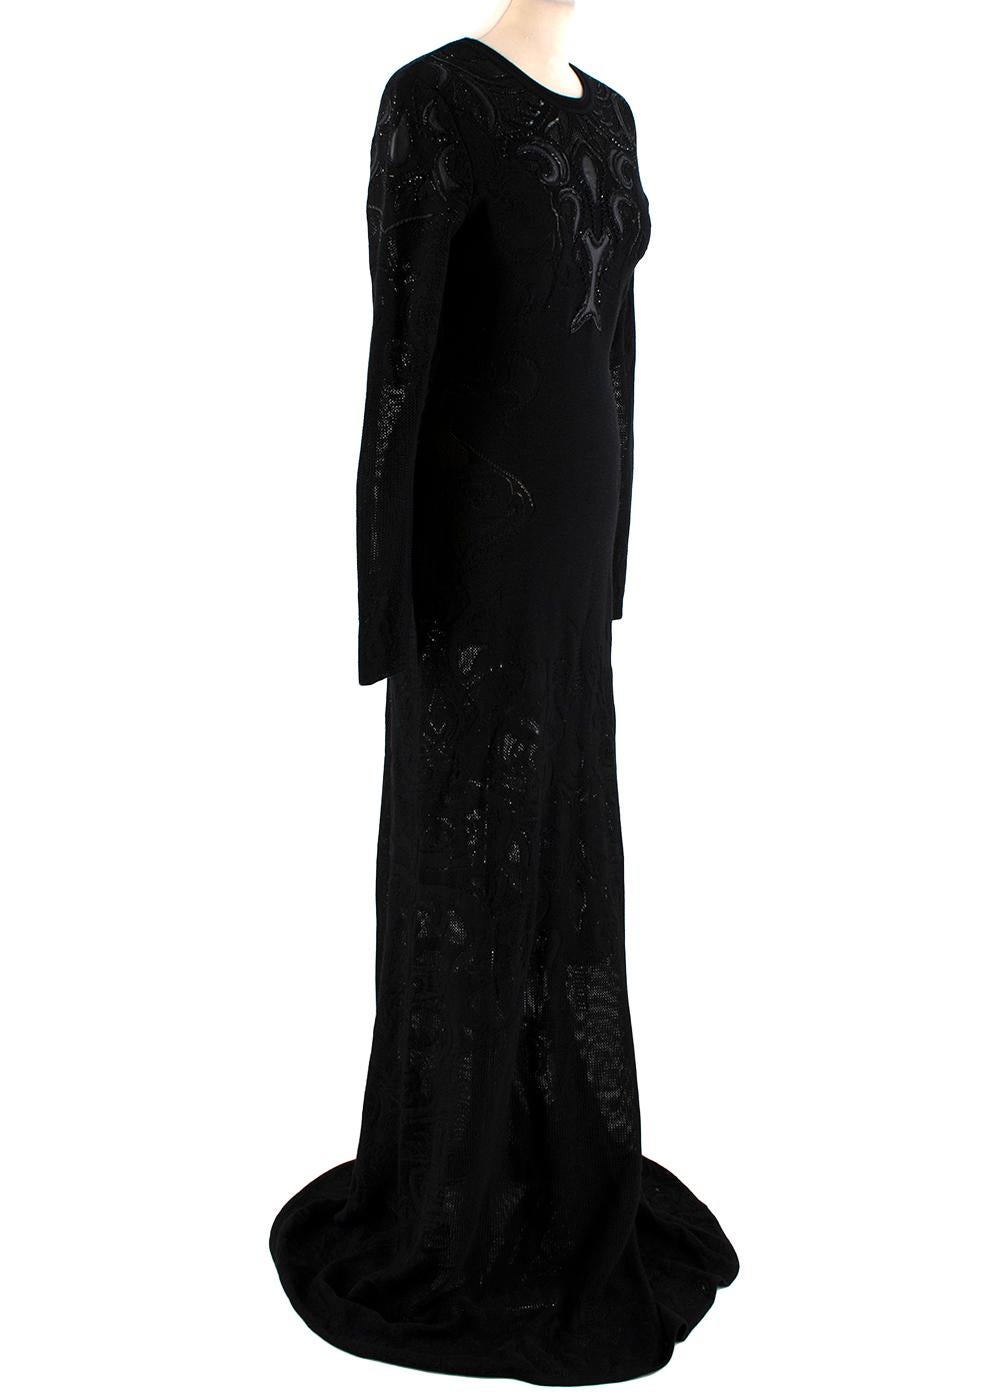 Roberto Cavalli Wool Blend Crochet-Knit Embellished Gown

- Black crochet knitted gown
- Soft wool blend 
- Long sleeves 
- Floor length 
- Beaded embellished chest with leather detailing
- Keyhole open back 

Materials: 
55% Wool, 45% Viscose 

Dry